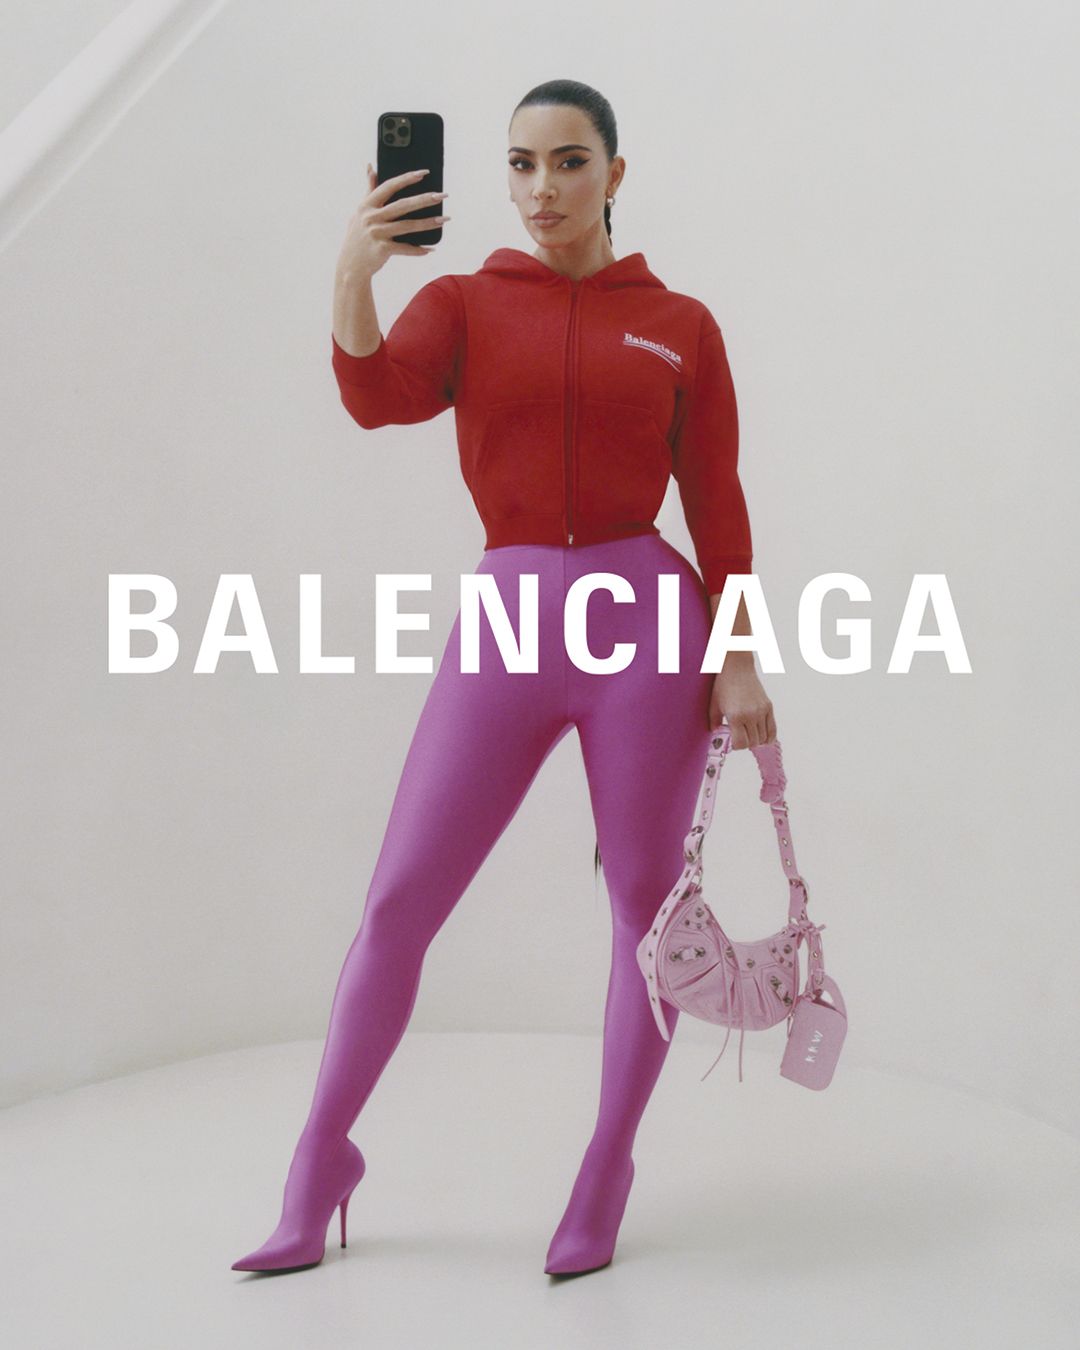 First look at Balenciagas Spring 22 dystopic and robotic campaign